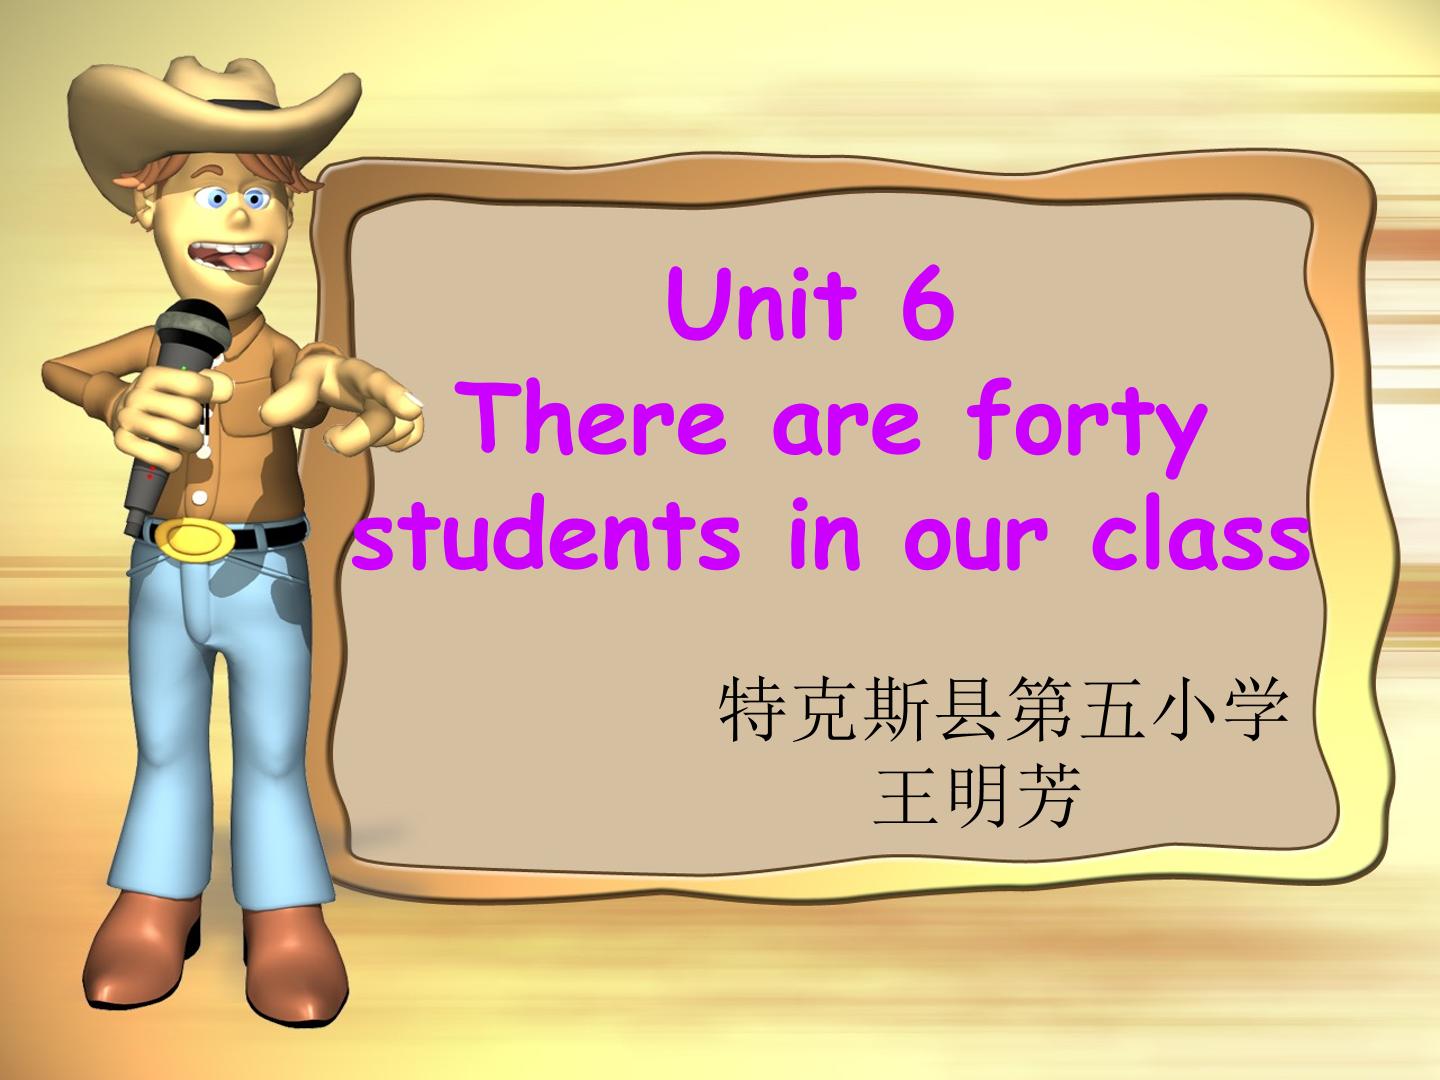 There are forty students in our class  2